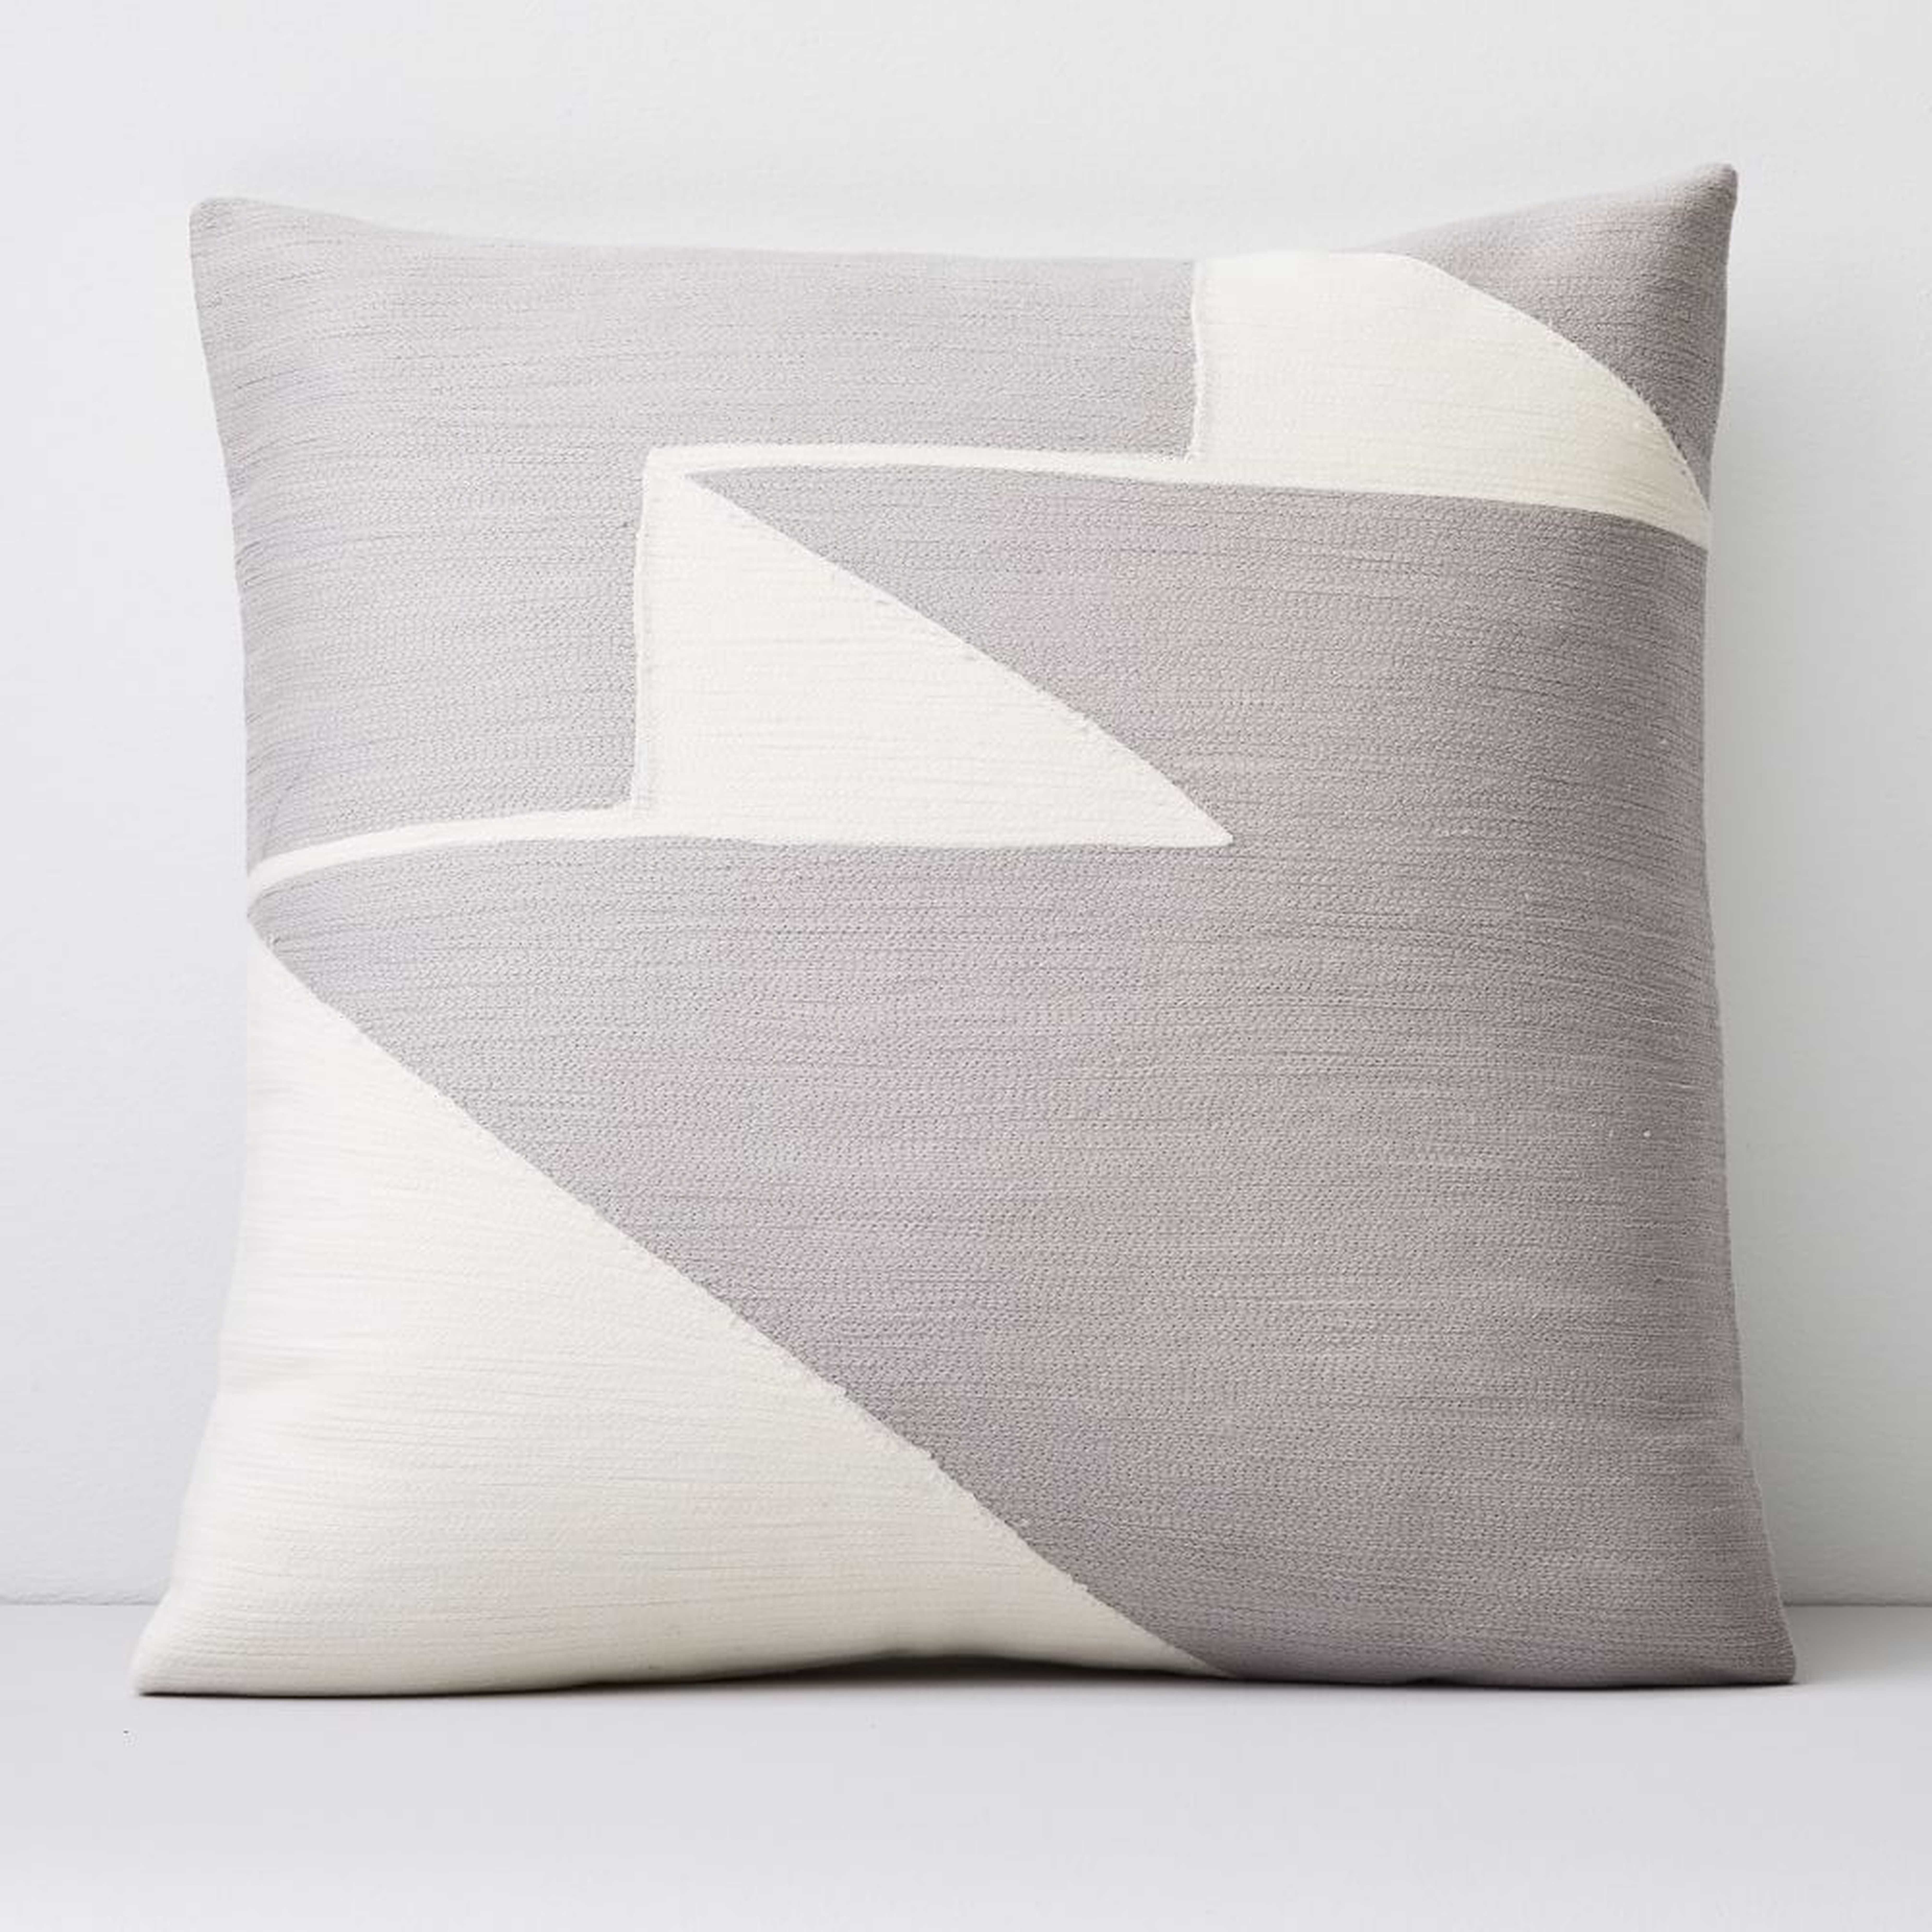 Crewel Steps Pillow Cover, Frost Gray, 18"x18" - West Elm